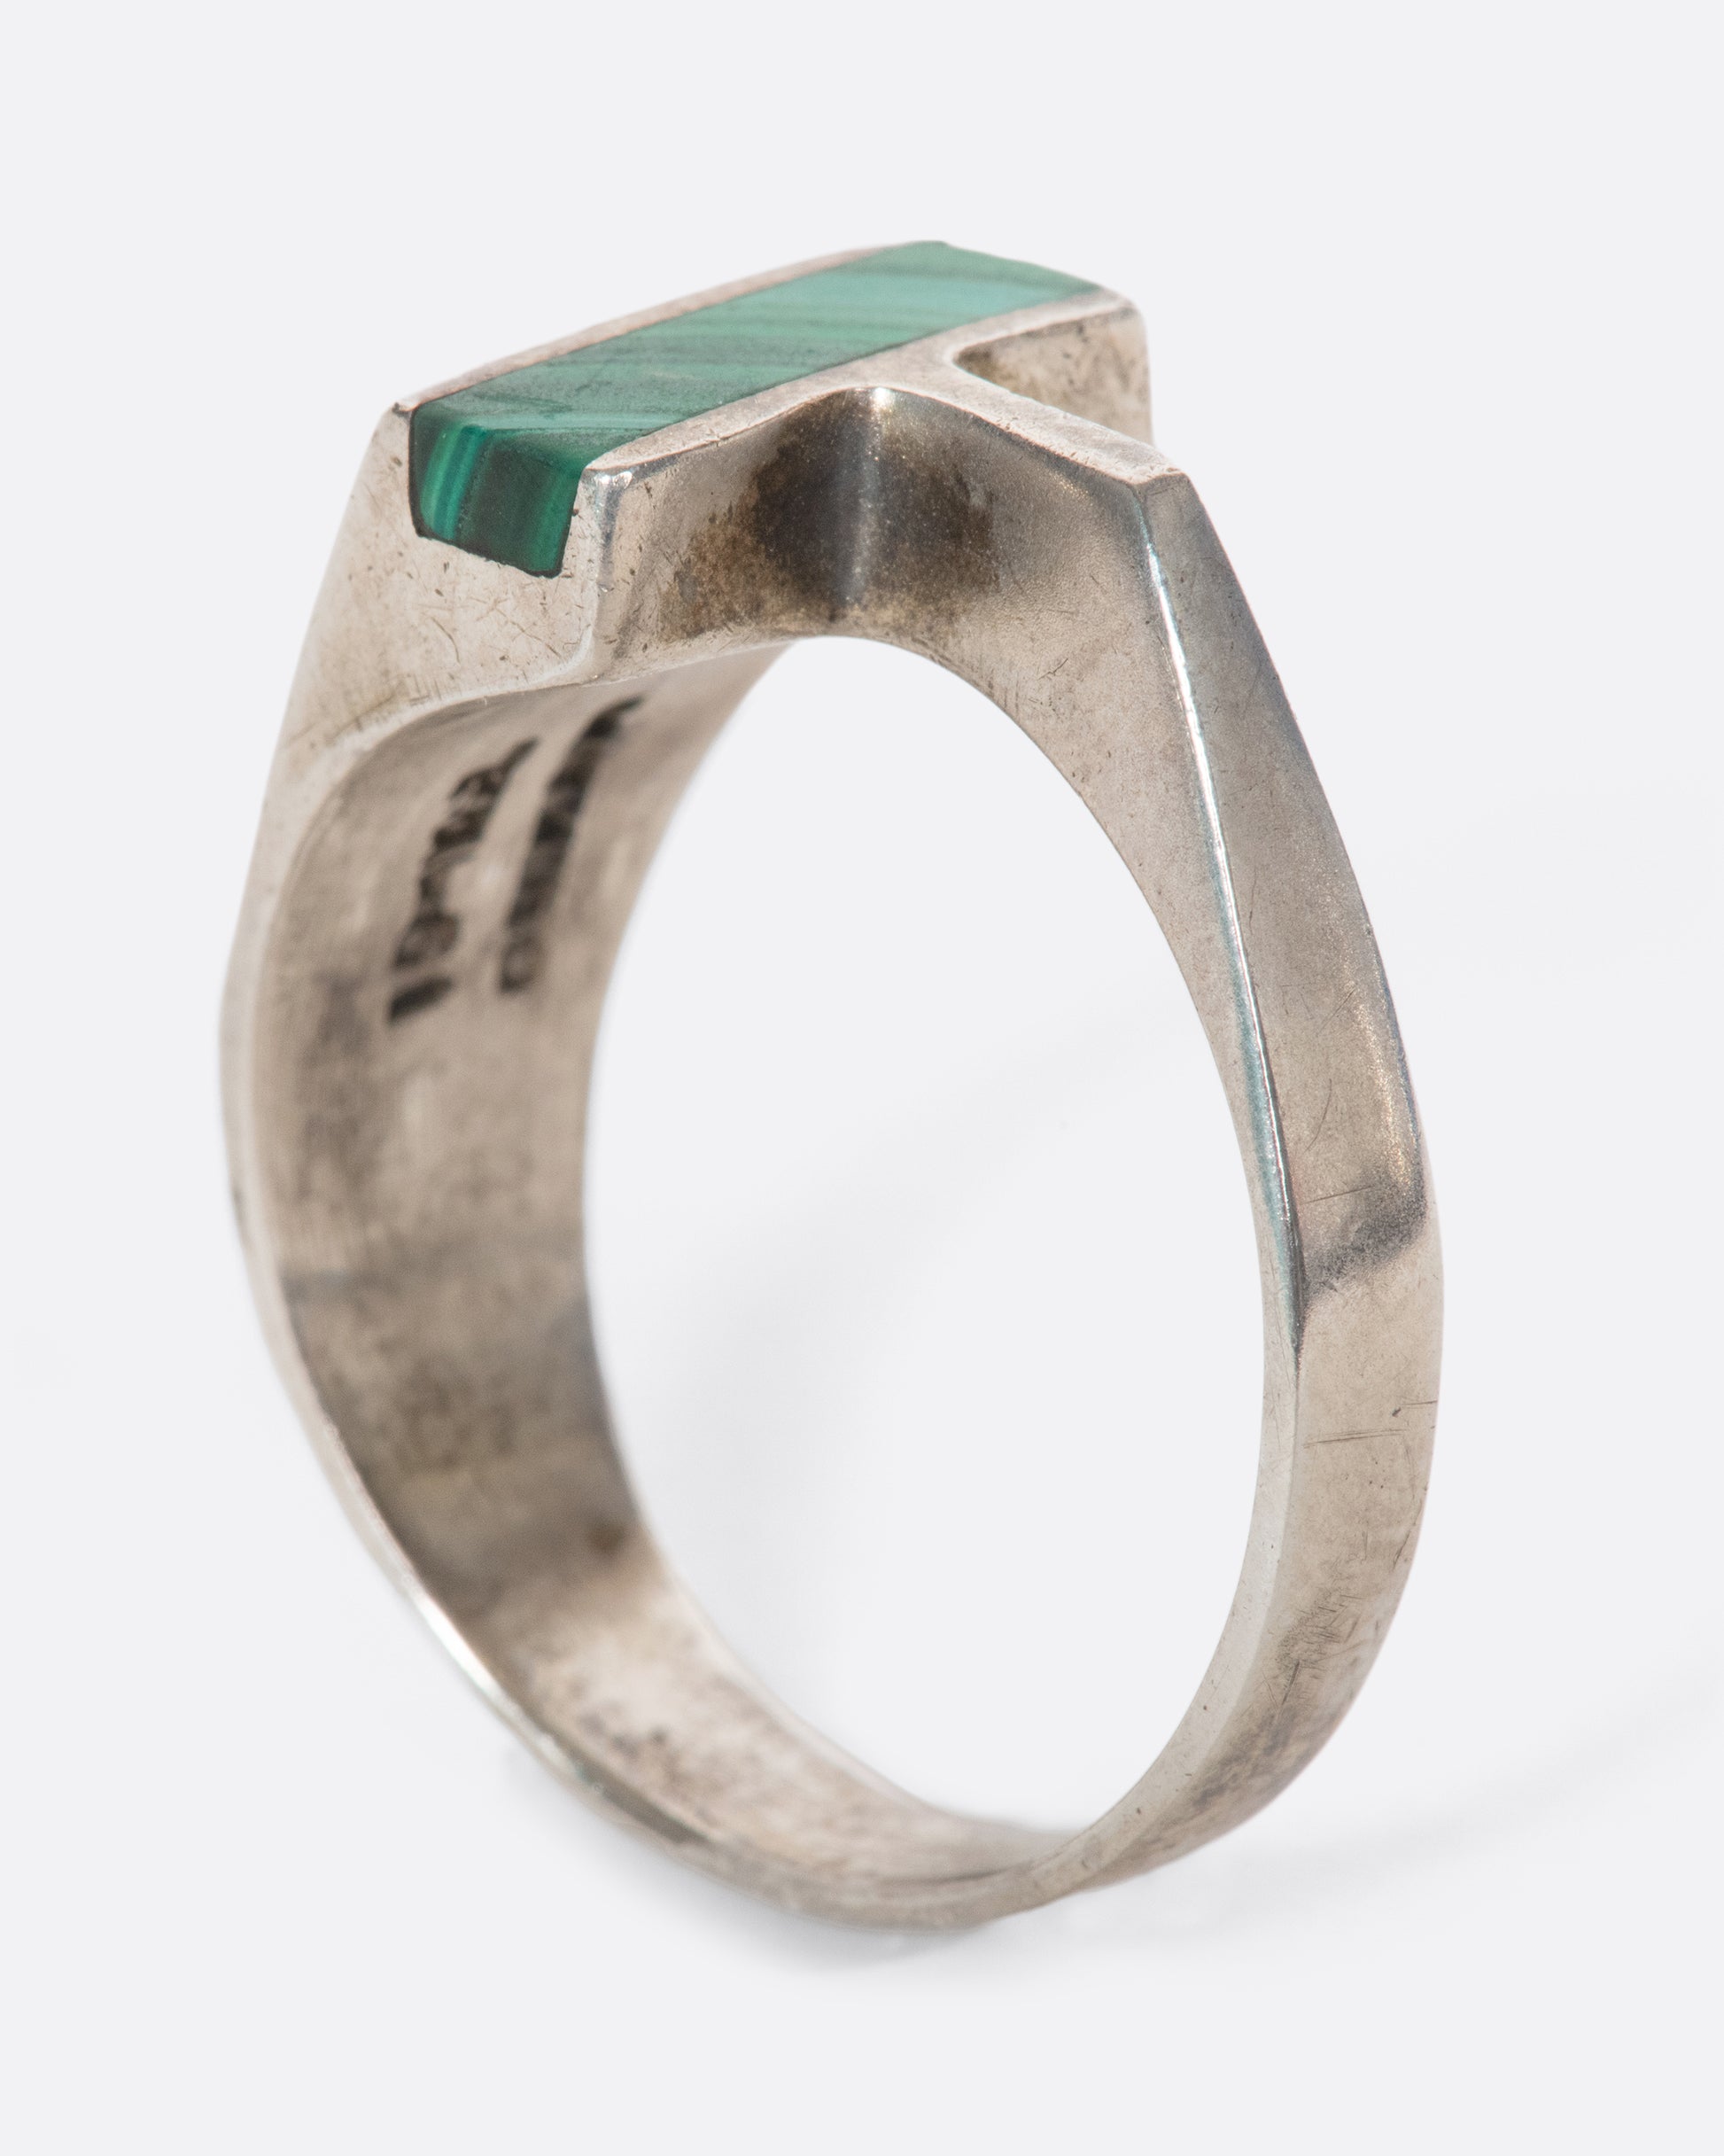 A vintage sterling silver T-shaped ring with a slice of malachite sitting high above your finger. The interesting asymmetry makes a statement without sacrificing comfort.